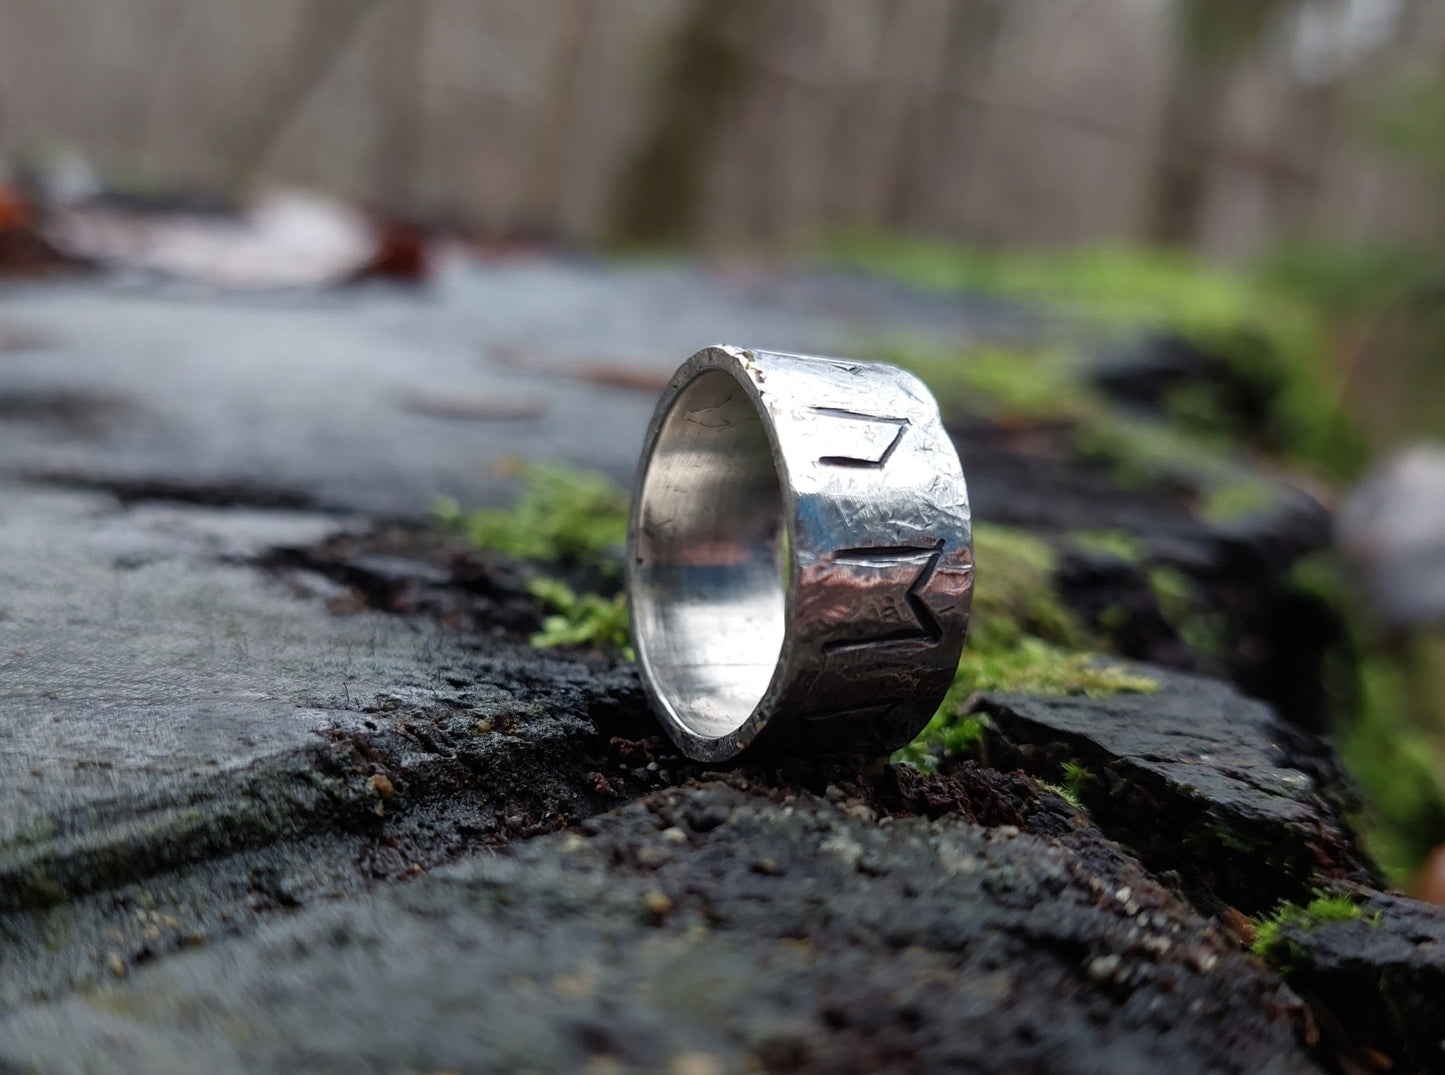 Real Money, luck, prosperity amulet, rustic sterling silver ring with celtic, viking runes formula. Powerful enchanted talisman